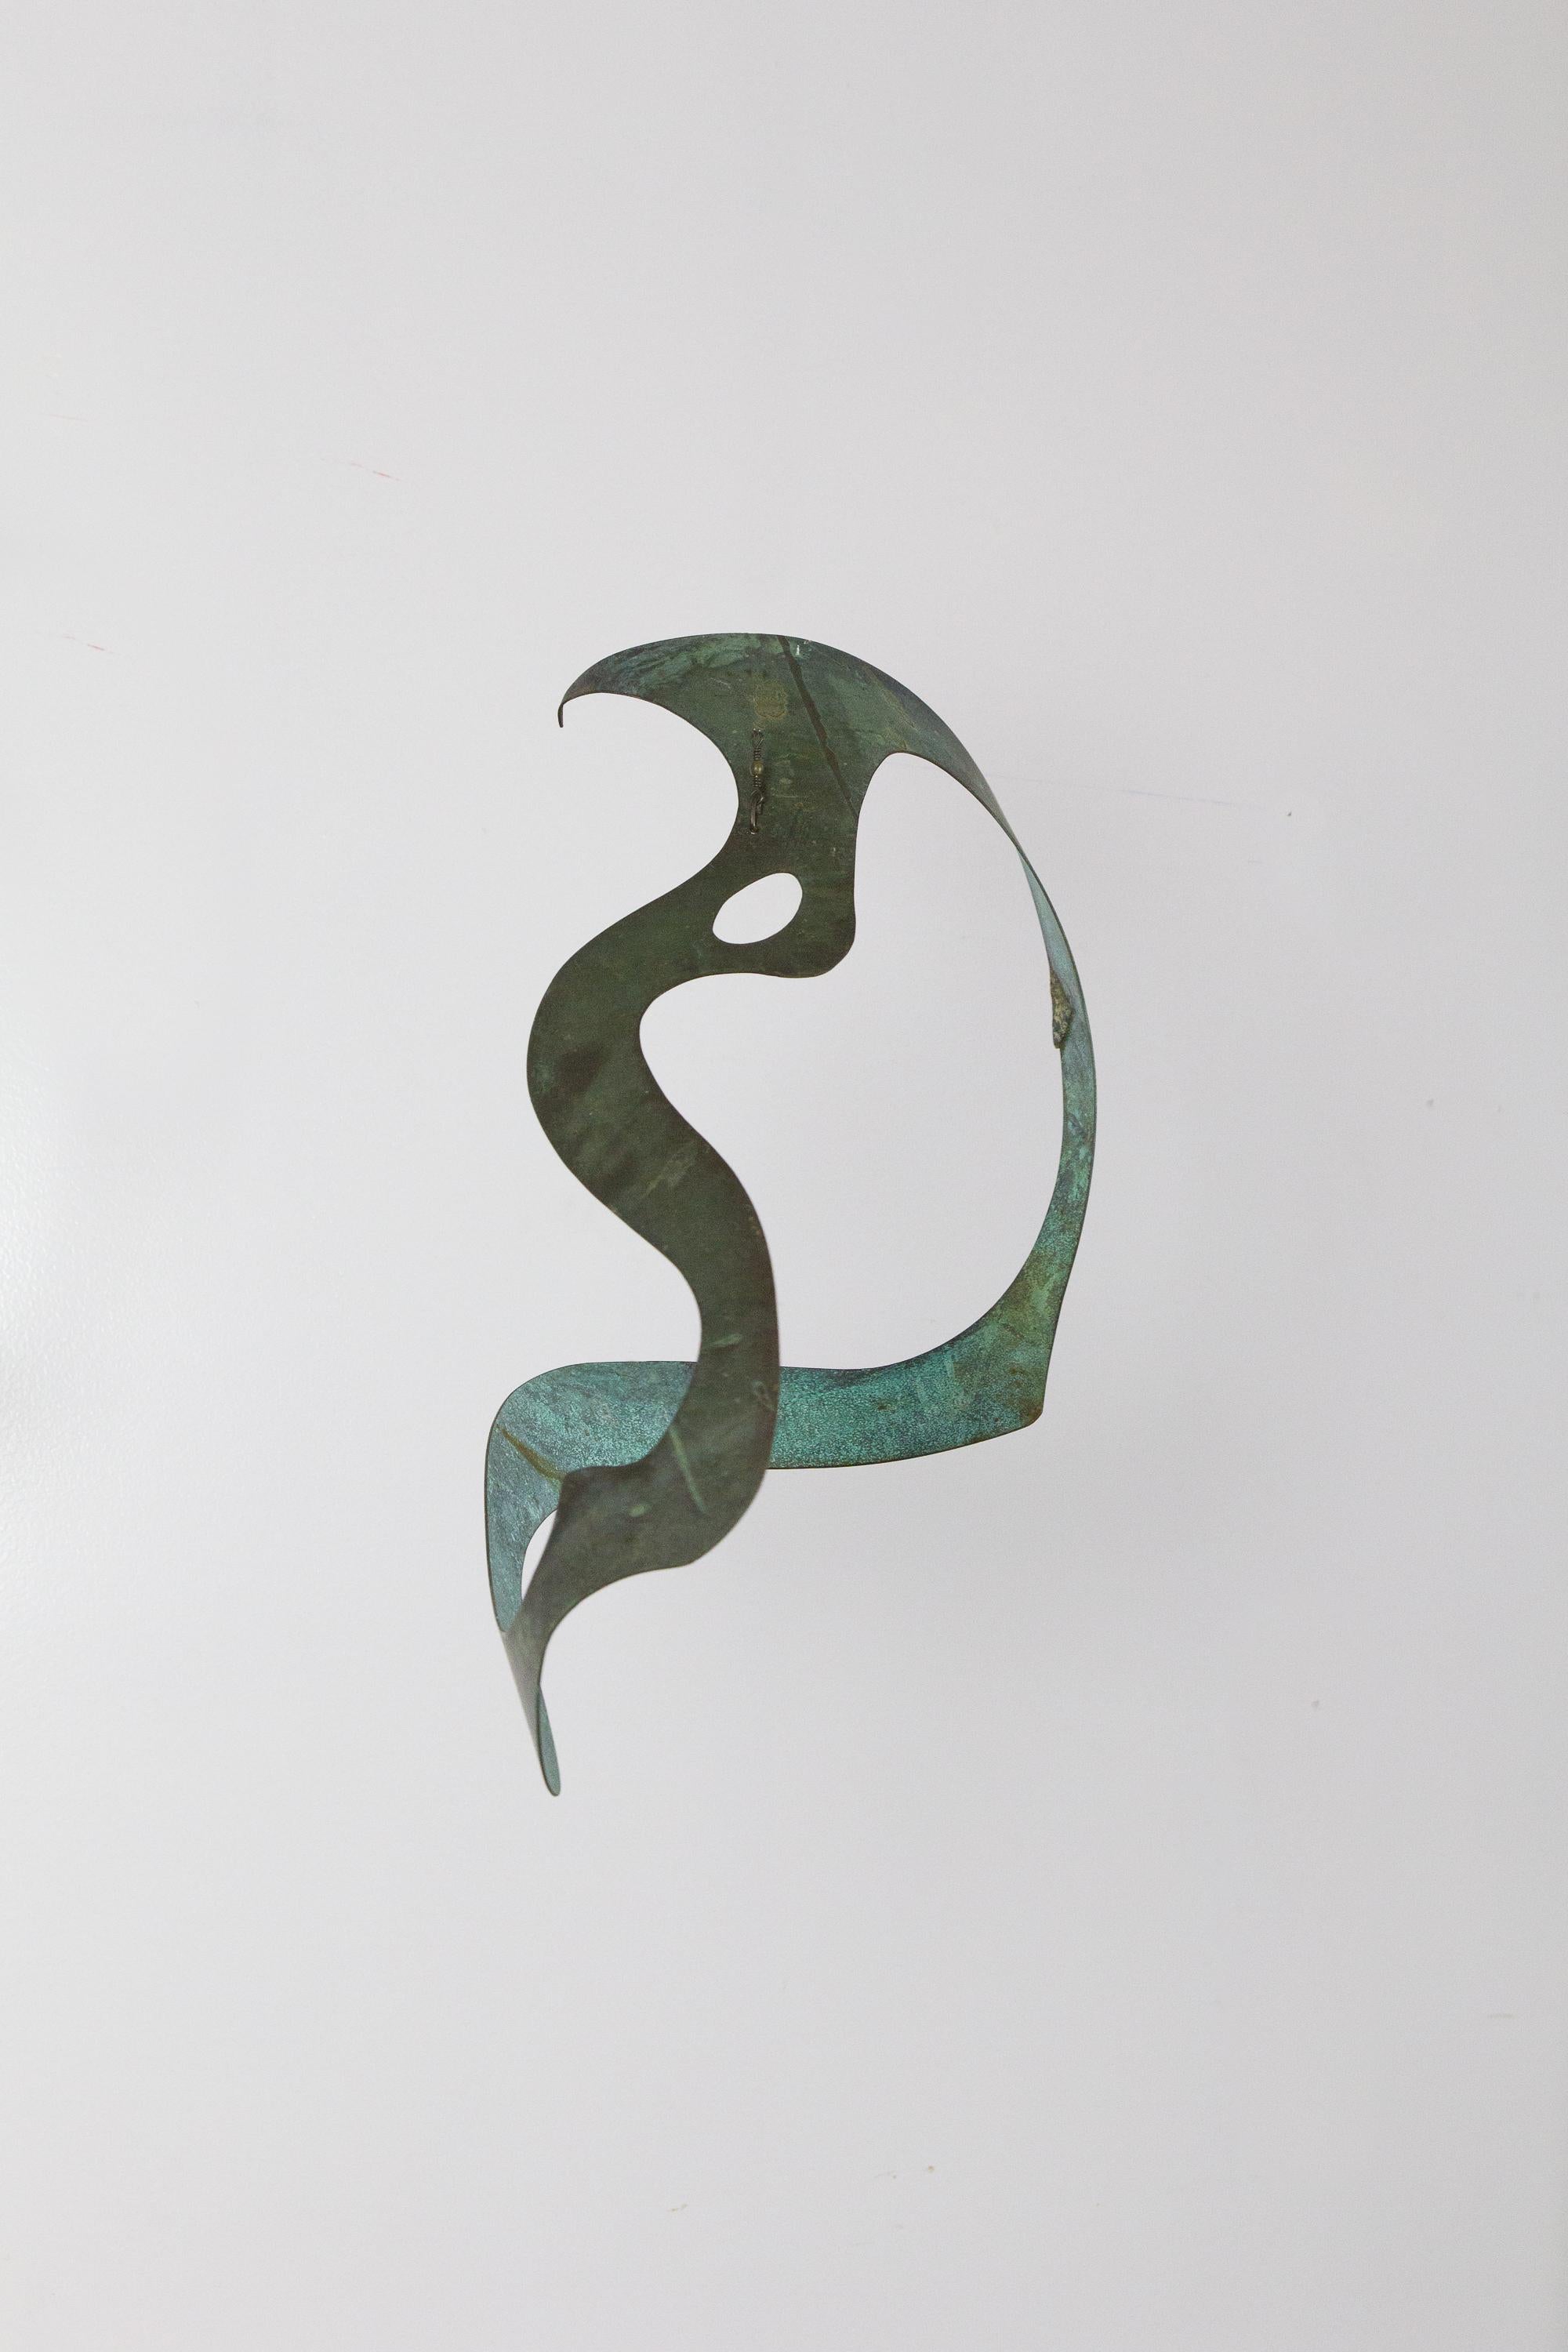 Handmade biomorphic patinated bronze hanging sculpture for use indoors or out. Form is dramatically different depending on the viewing angle. Retains original hanging hook.